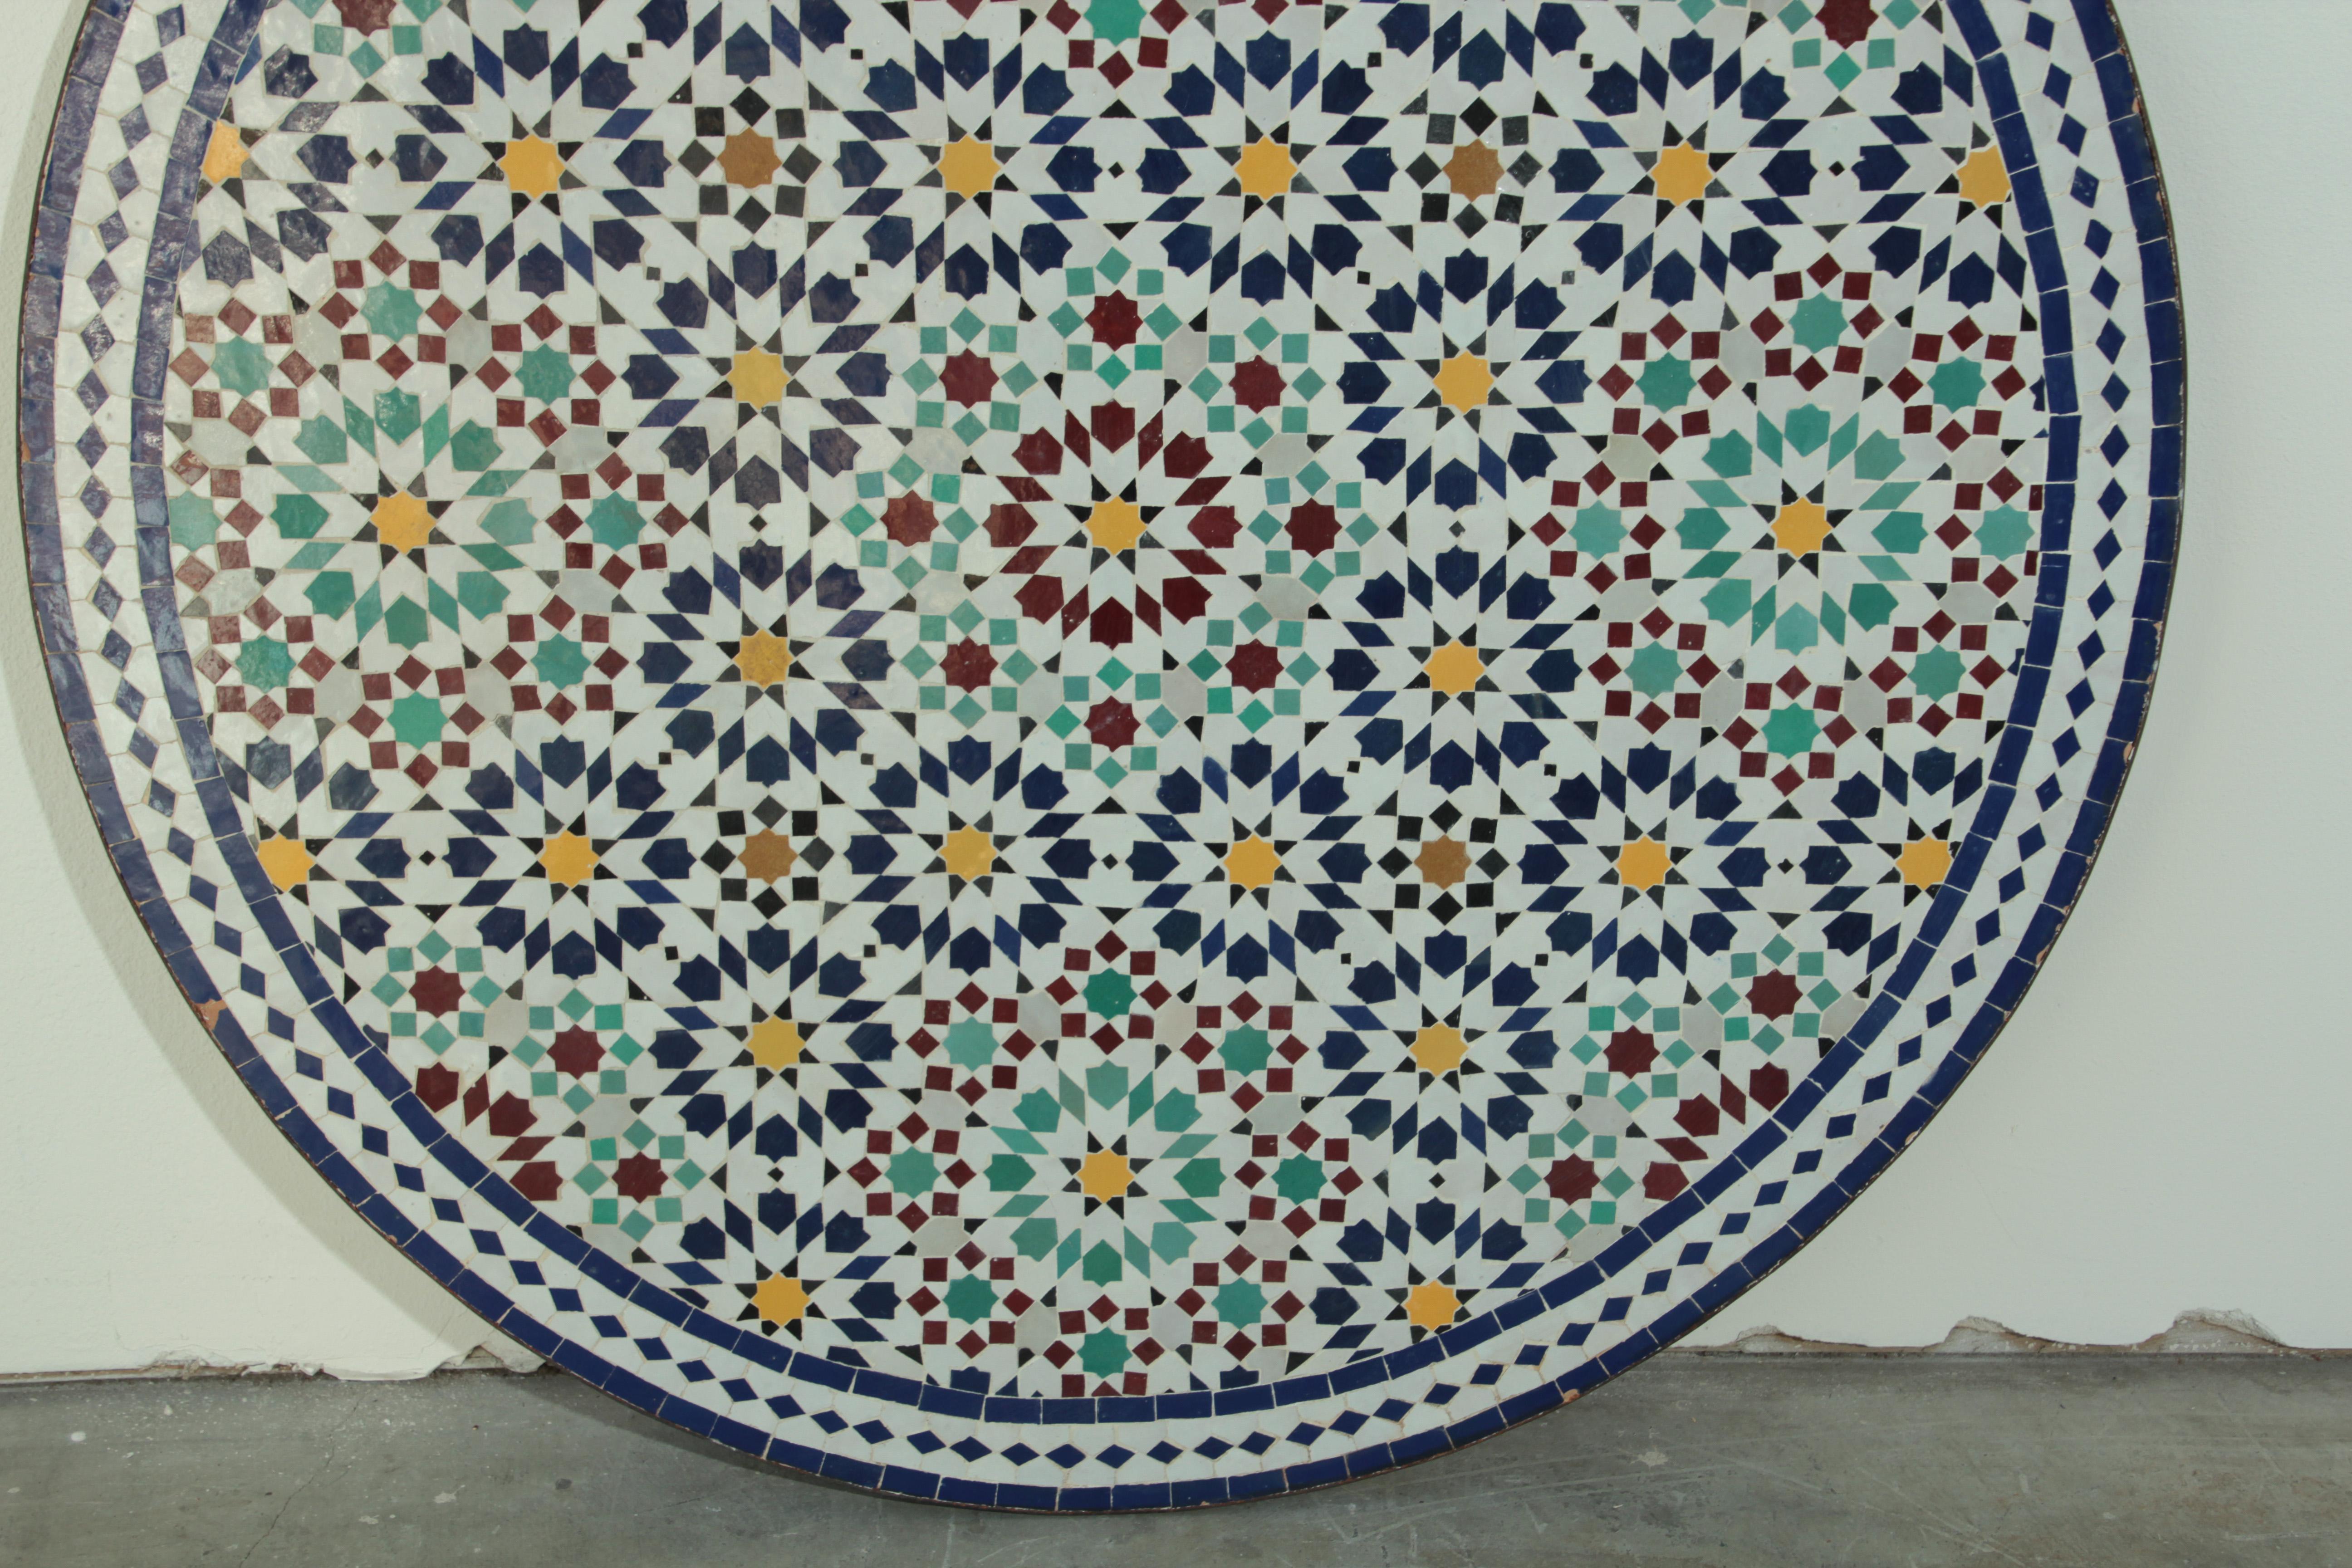 Moroccan Round Mosaic Outdoor Tile Table in Fez Moorish Design For Sale 7